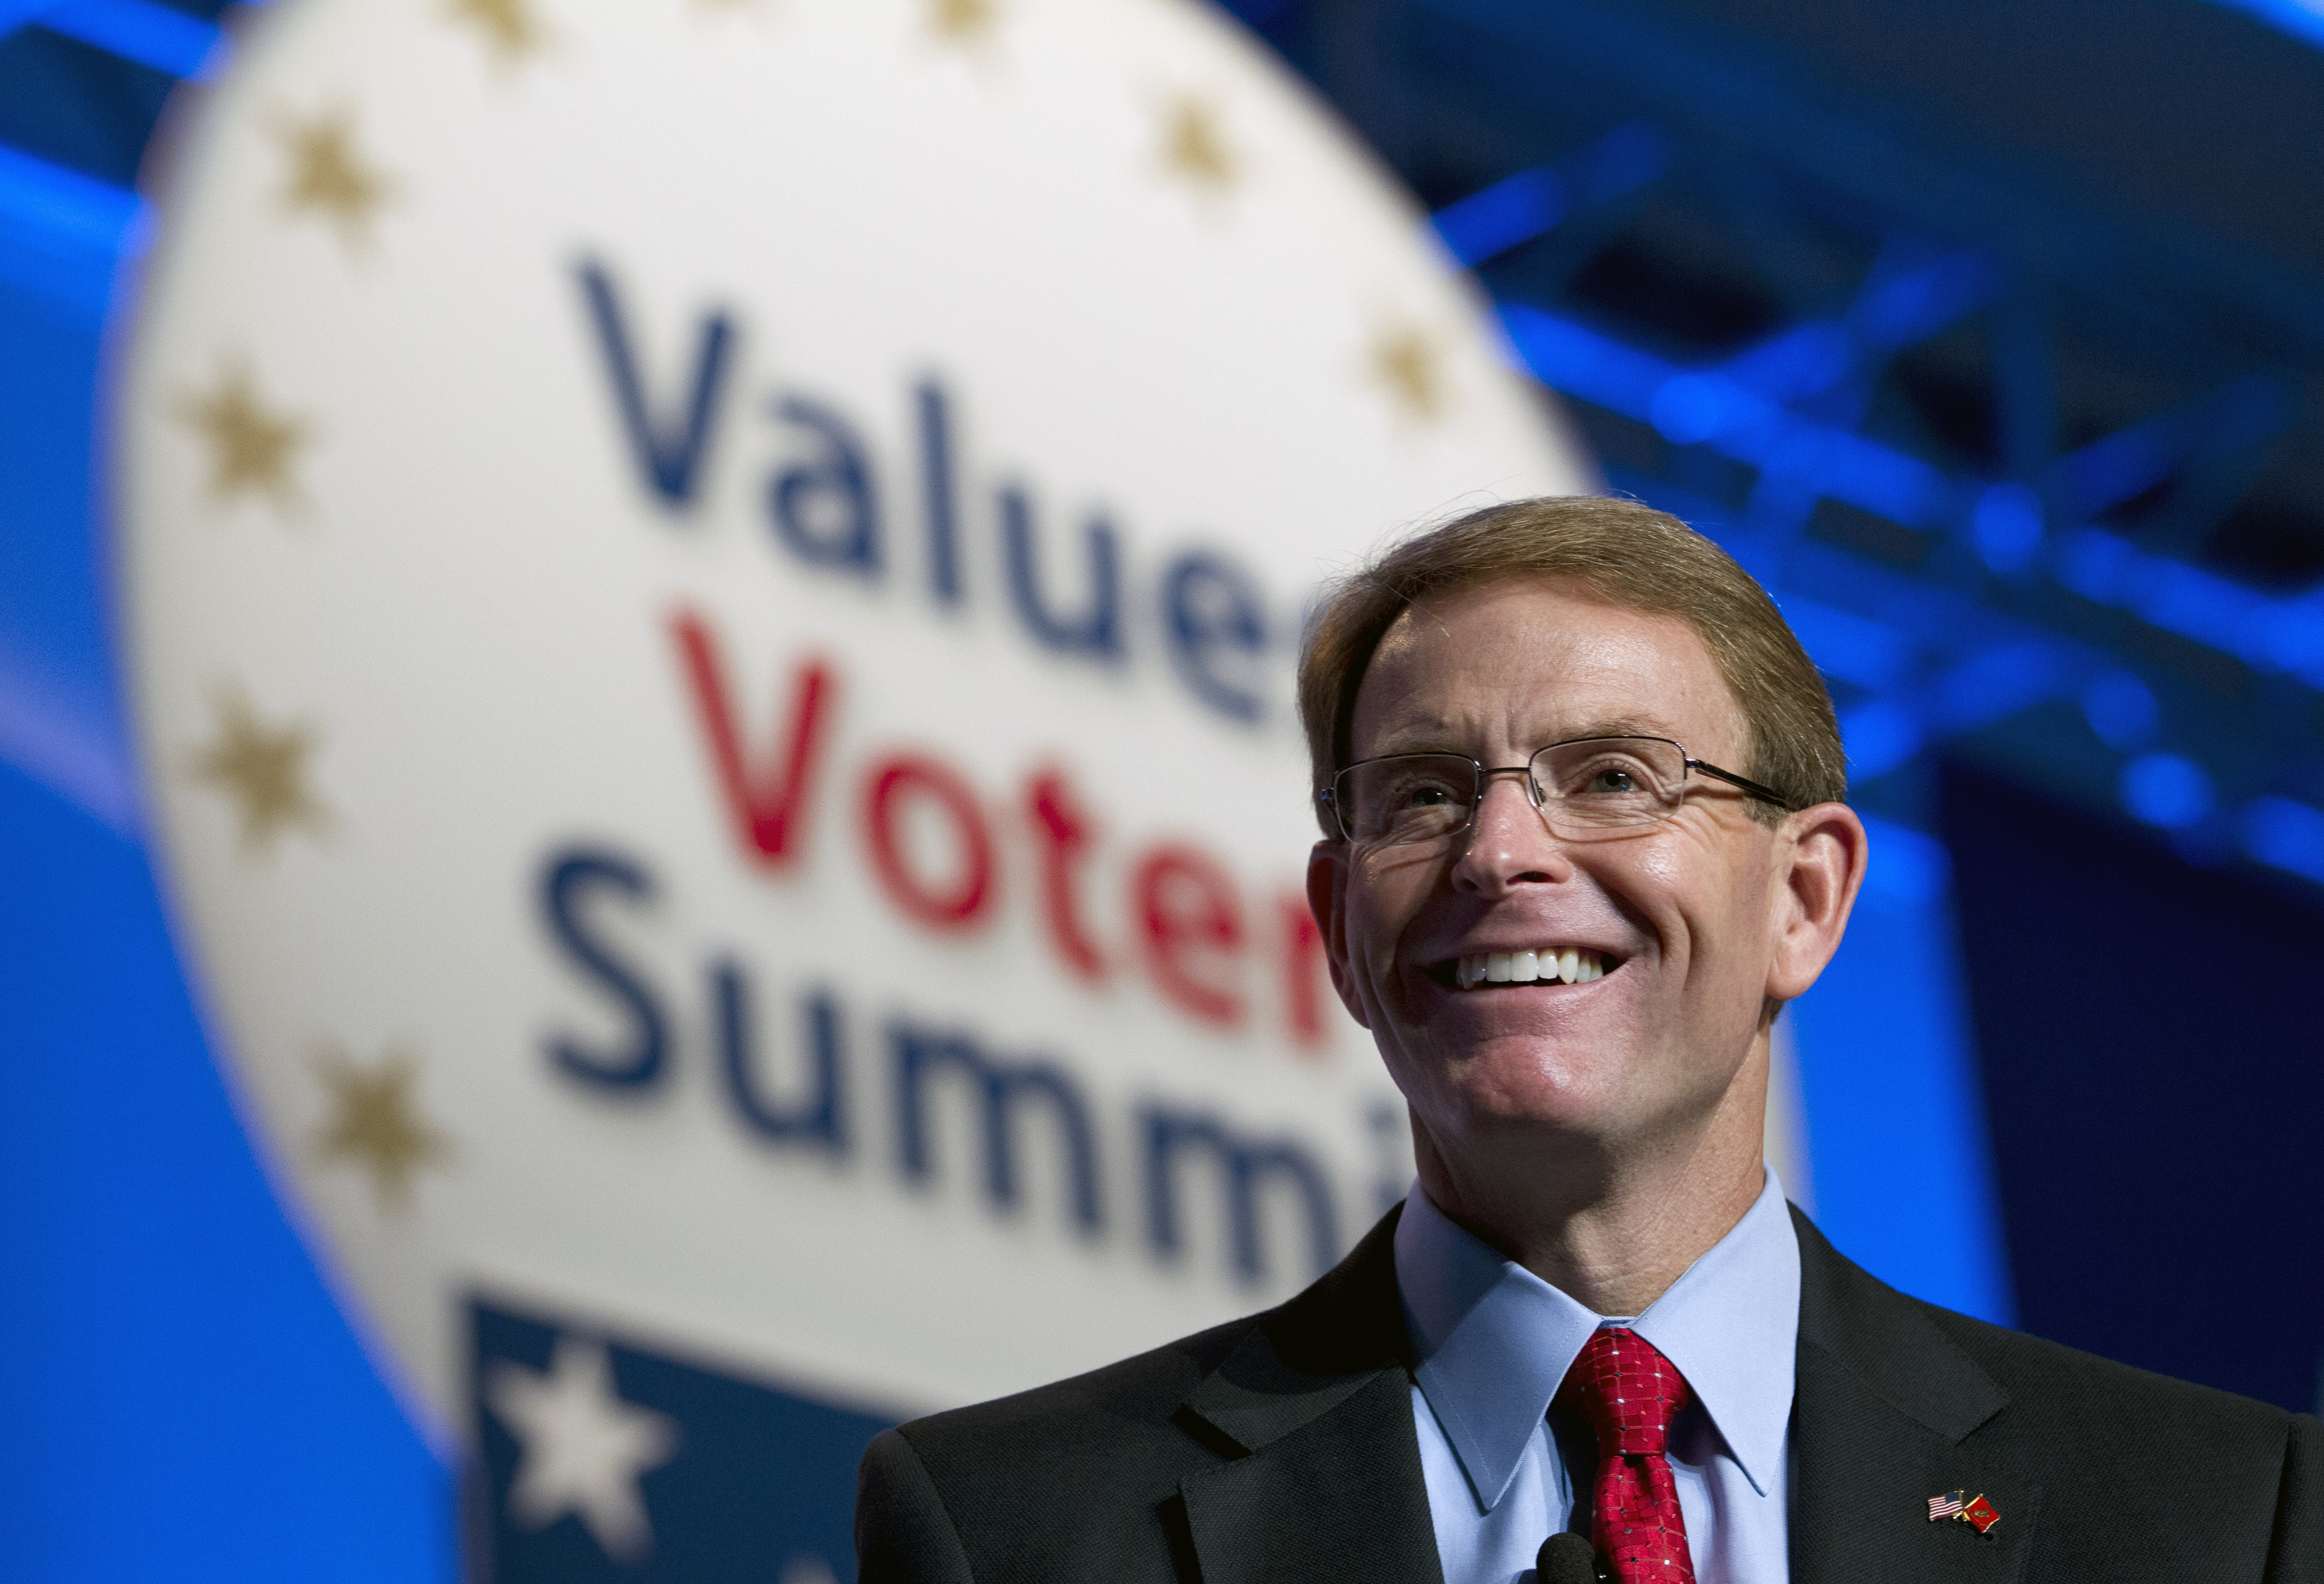 FRCAction and Family Research Council President Tony Perkins, speaks during the Values Voter Summit, held by the Family Research Council Action, on Oct. 11, 2013, in Washington, D.C. (Jose Luis Magana—AP)